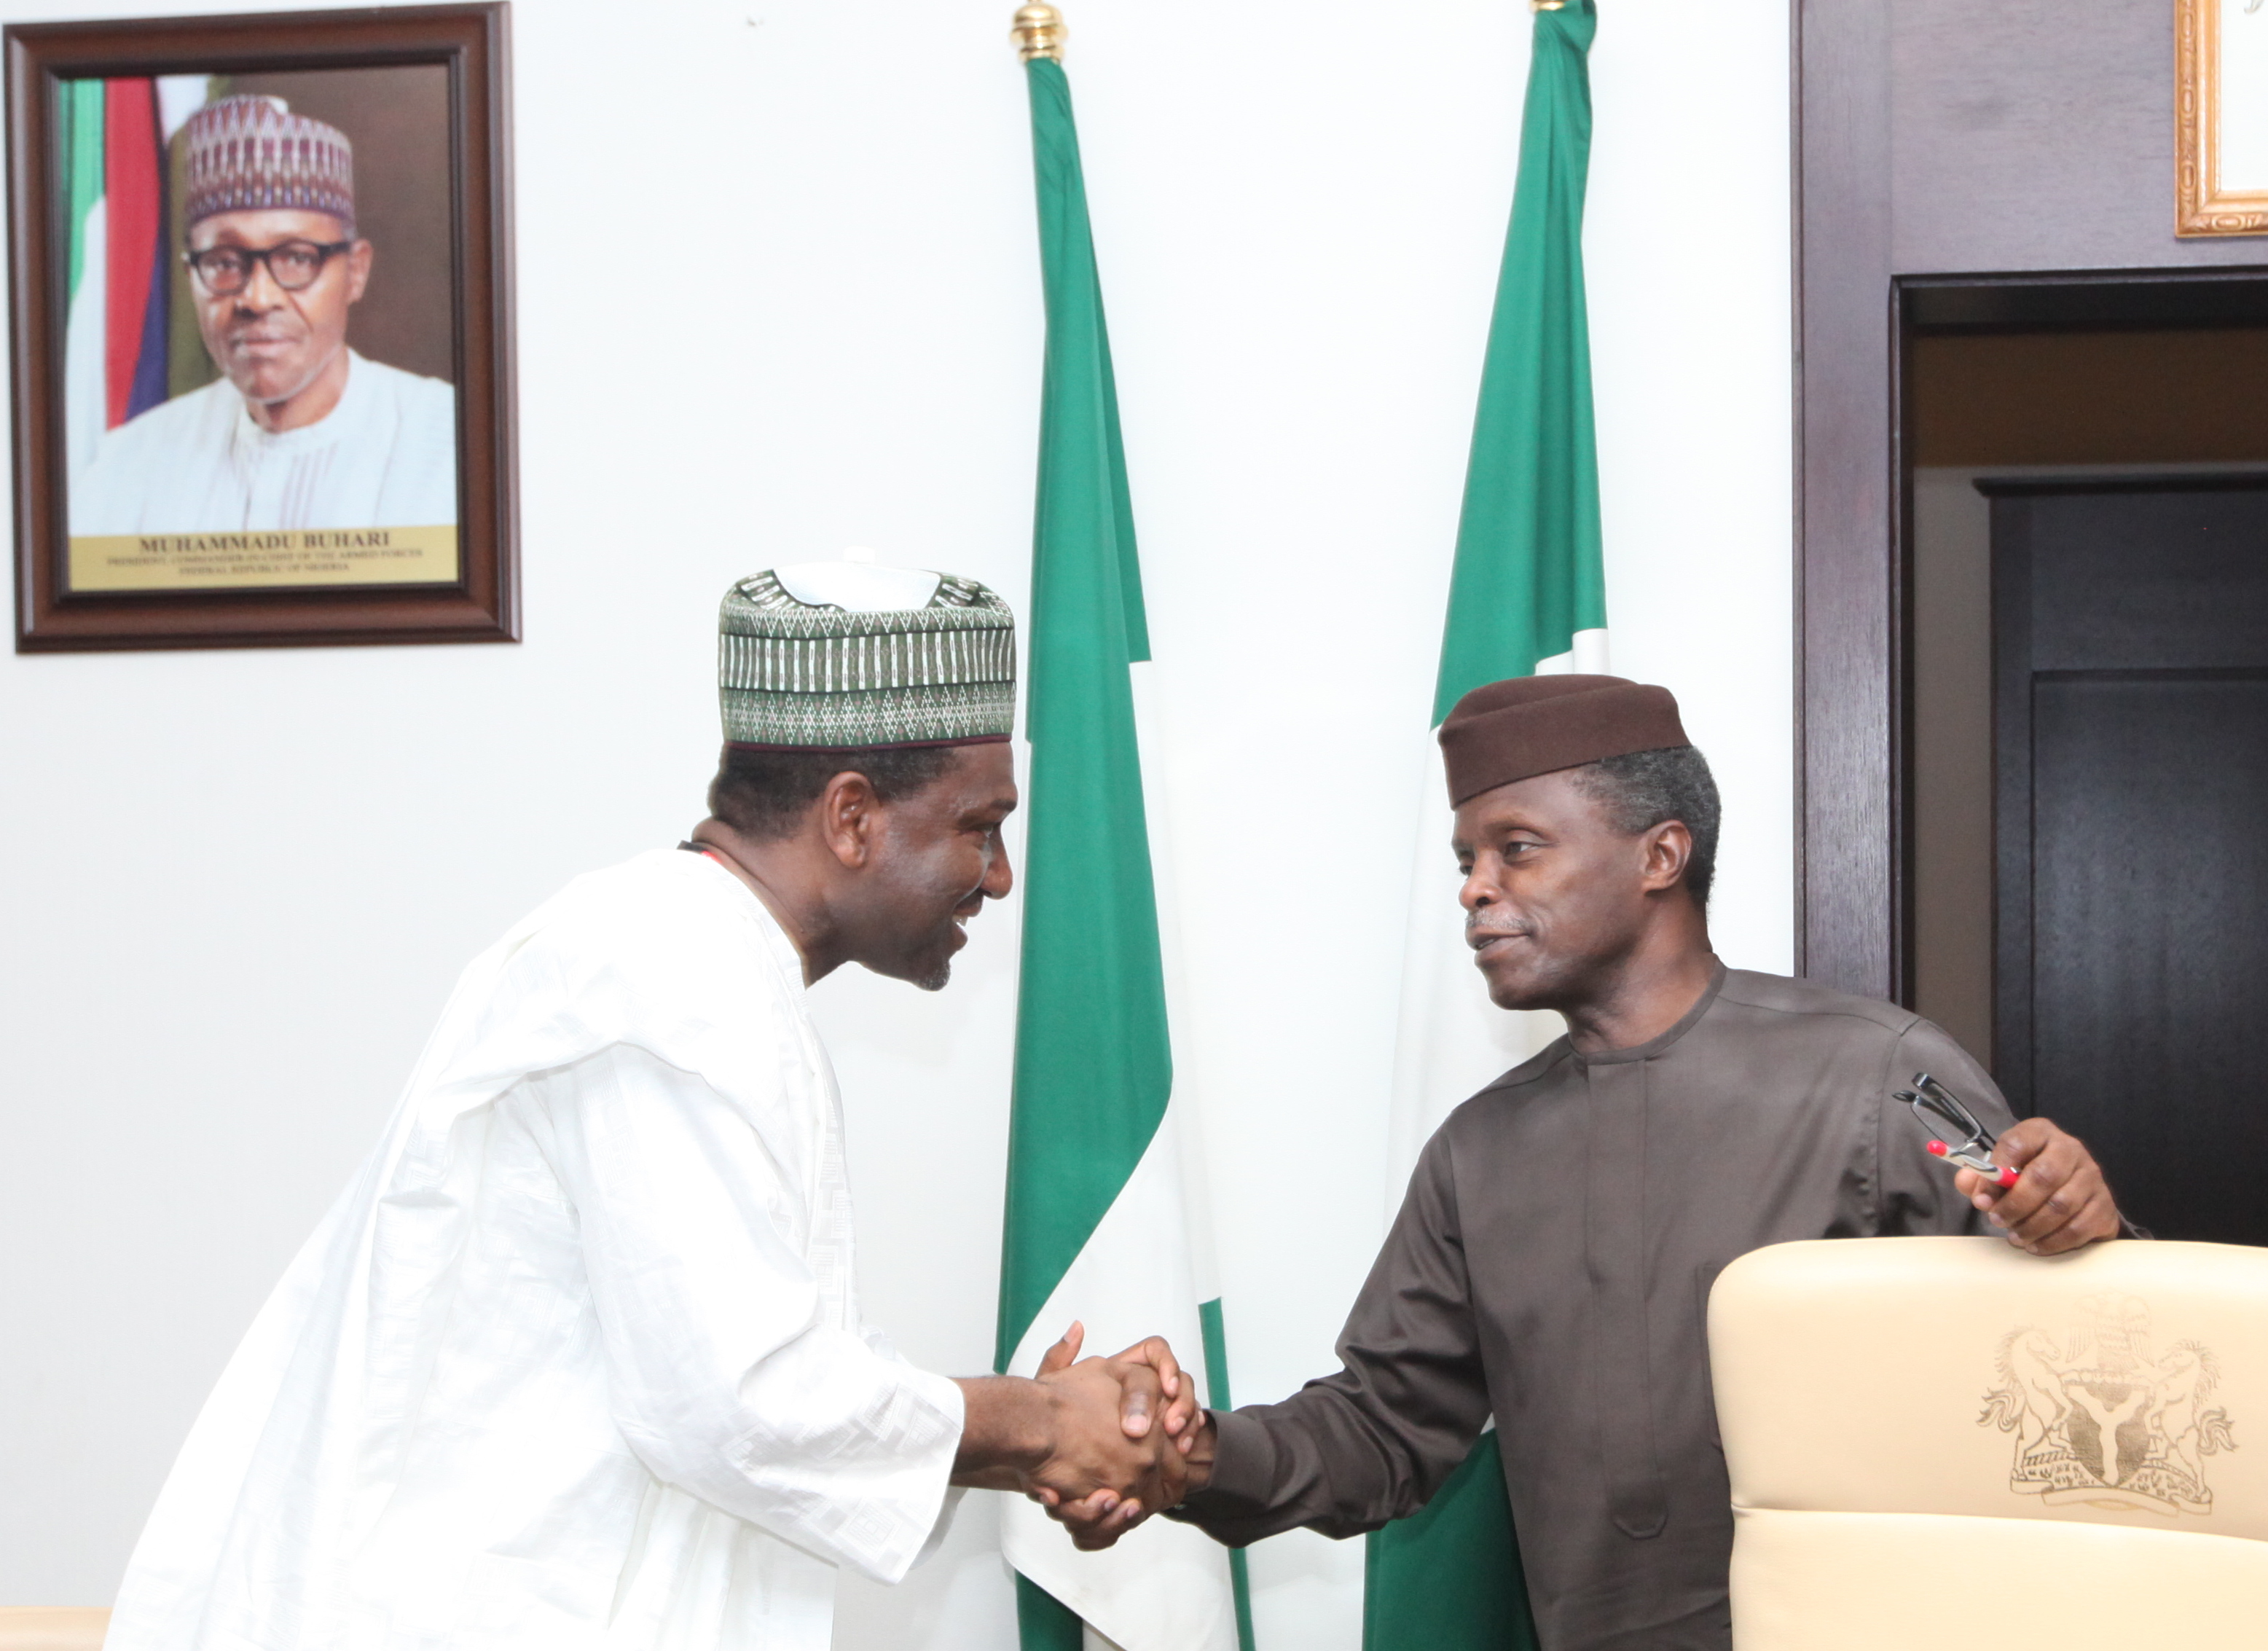 VP Osinbajo Meets With The Nigeria Agric Business Group (NABG) On 14/06/2016